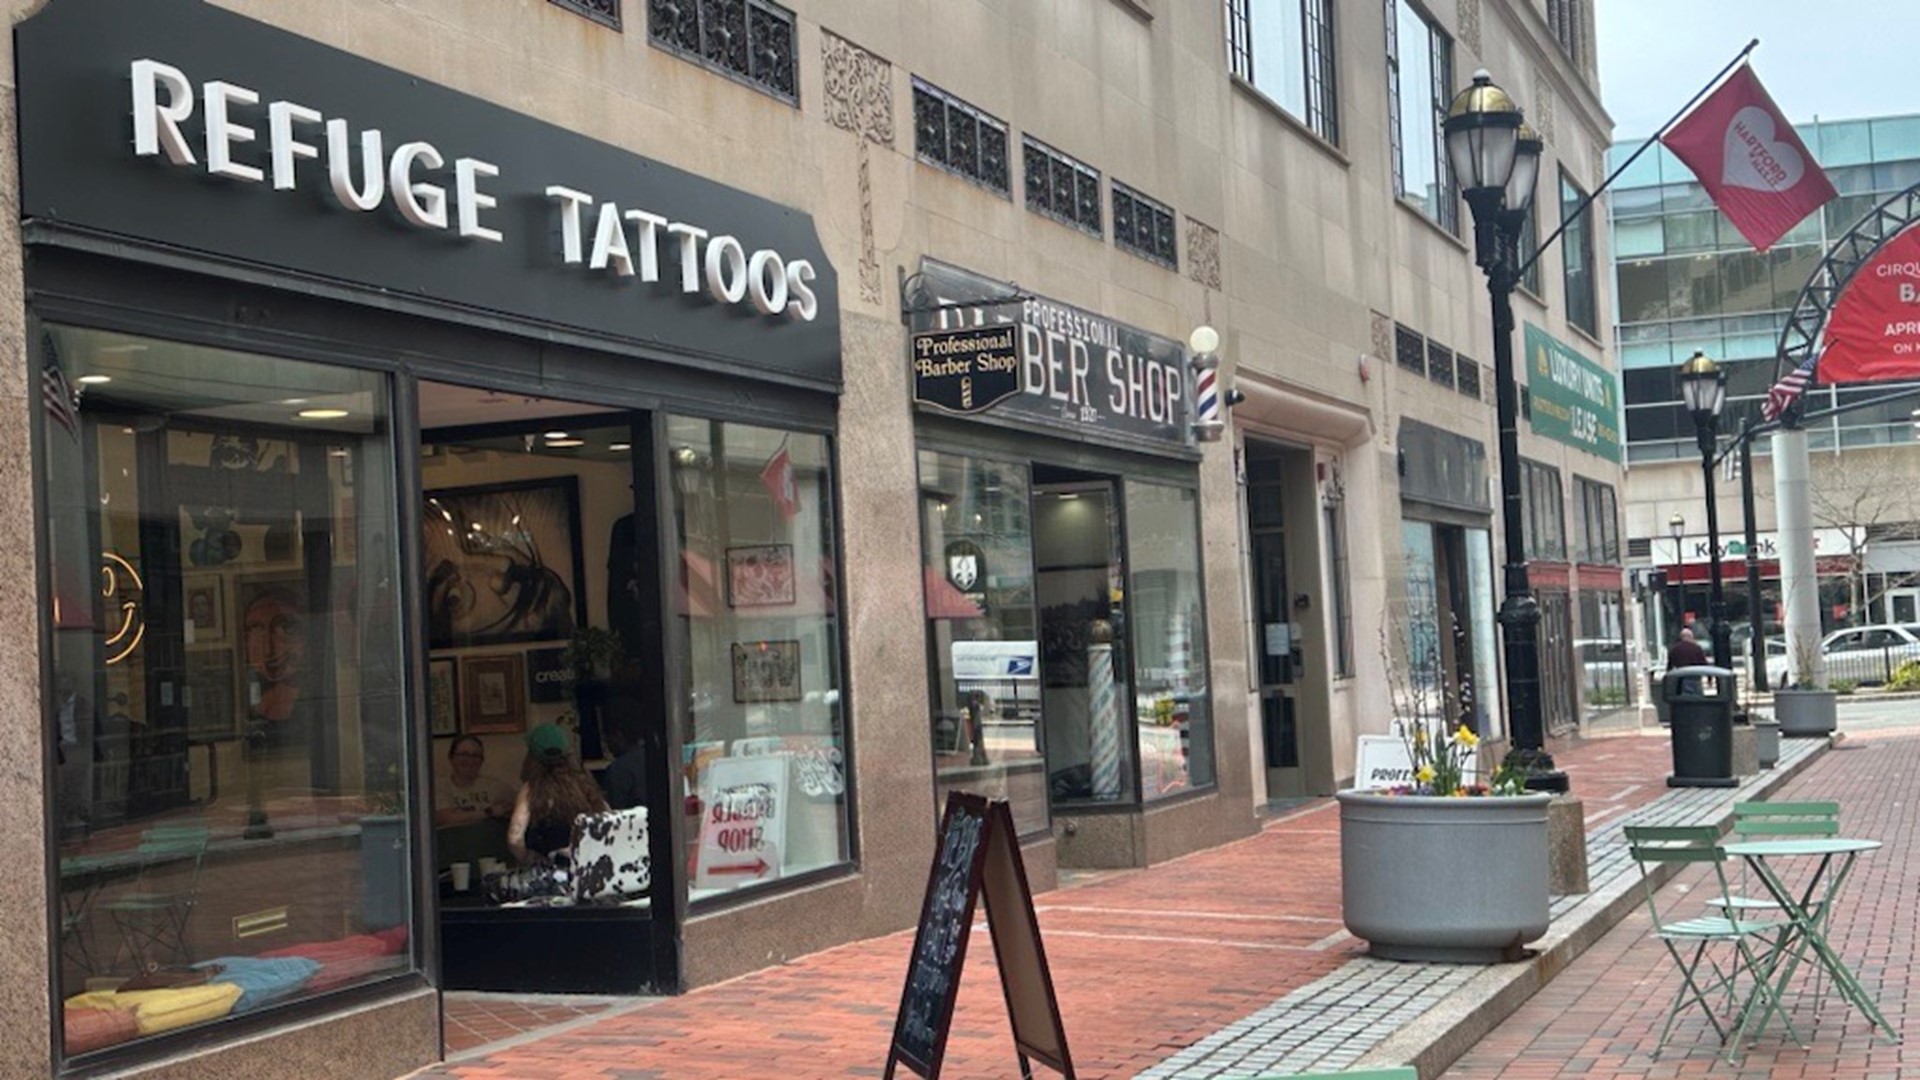 From coffee to tattoos, much can be found at the storefront at 95 Pratt Street in Hartford.